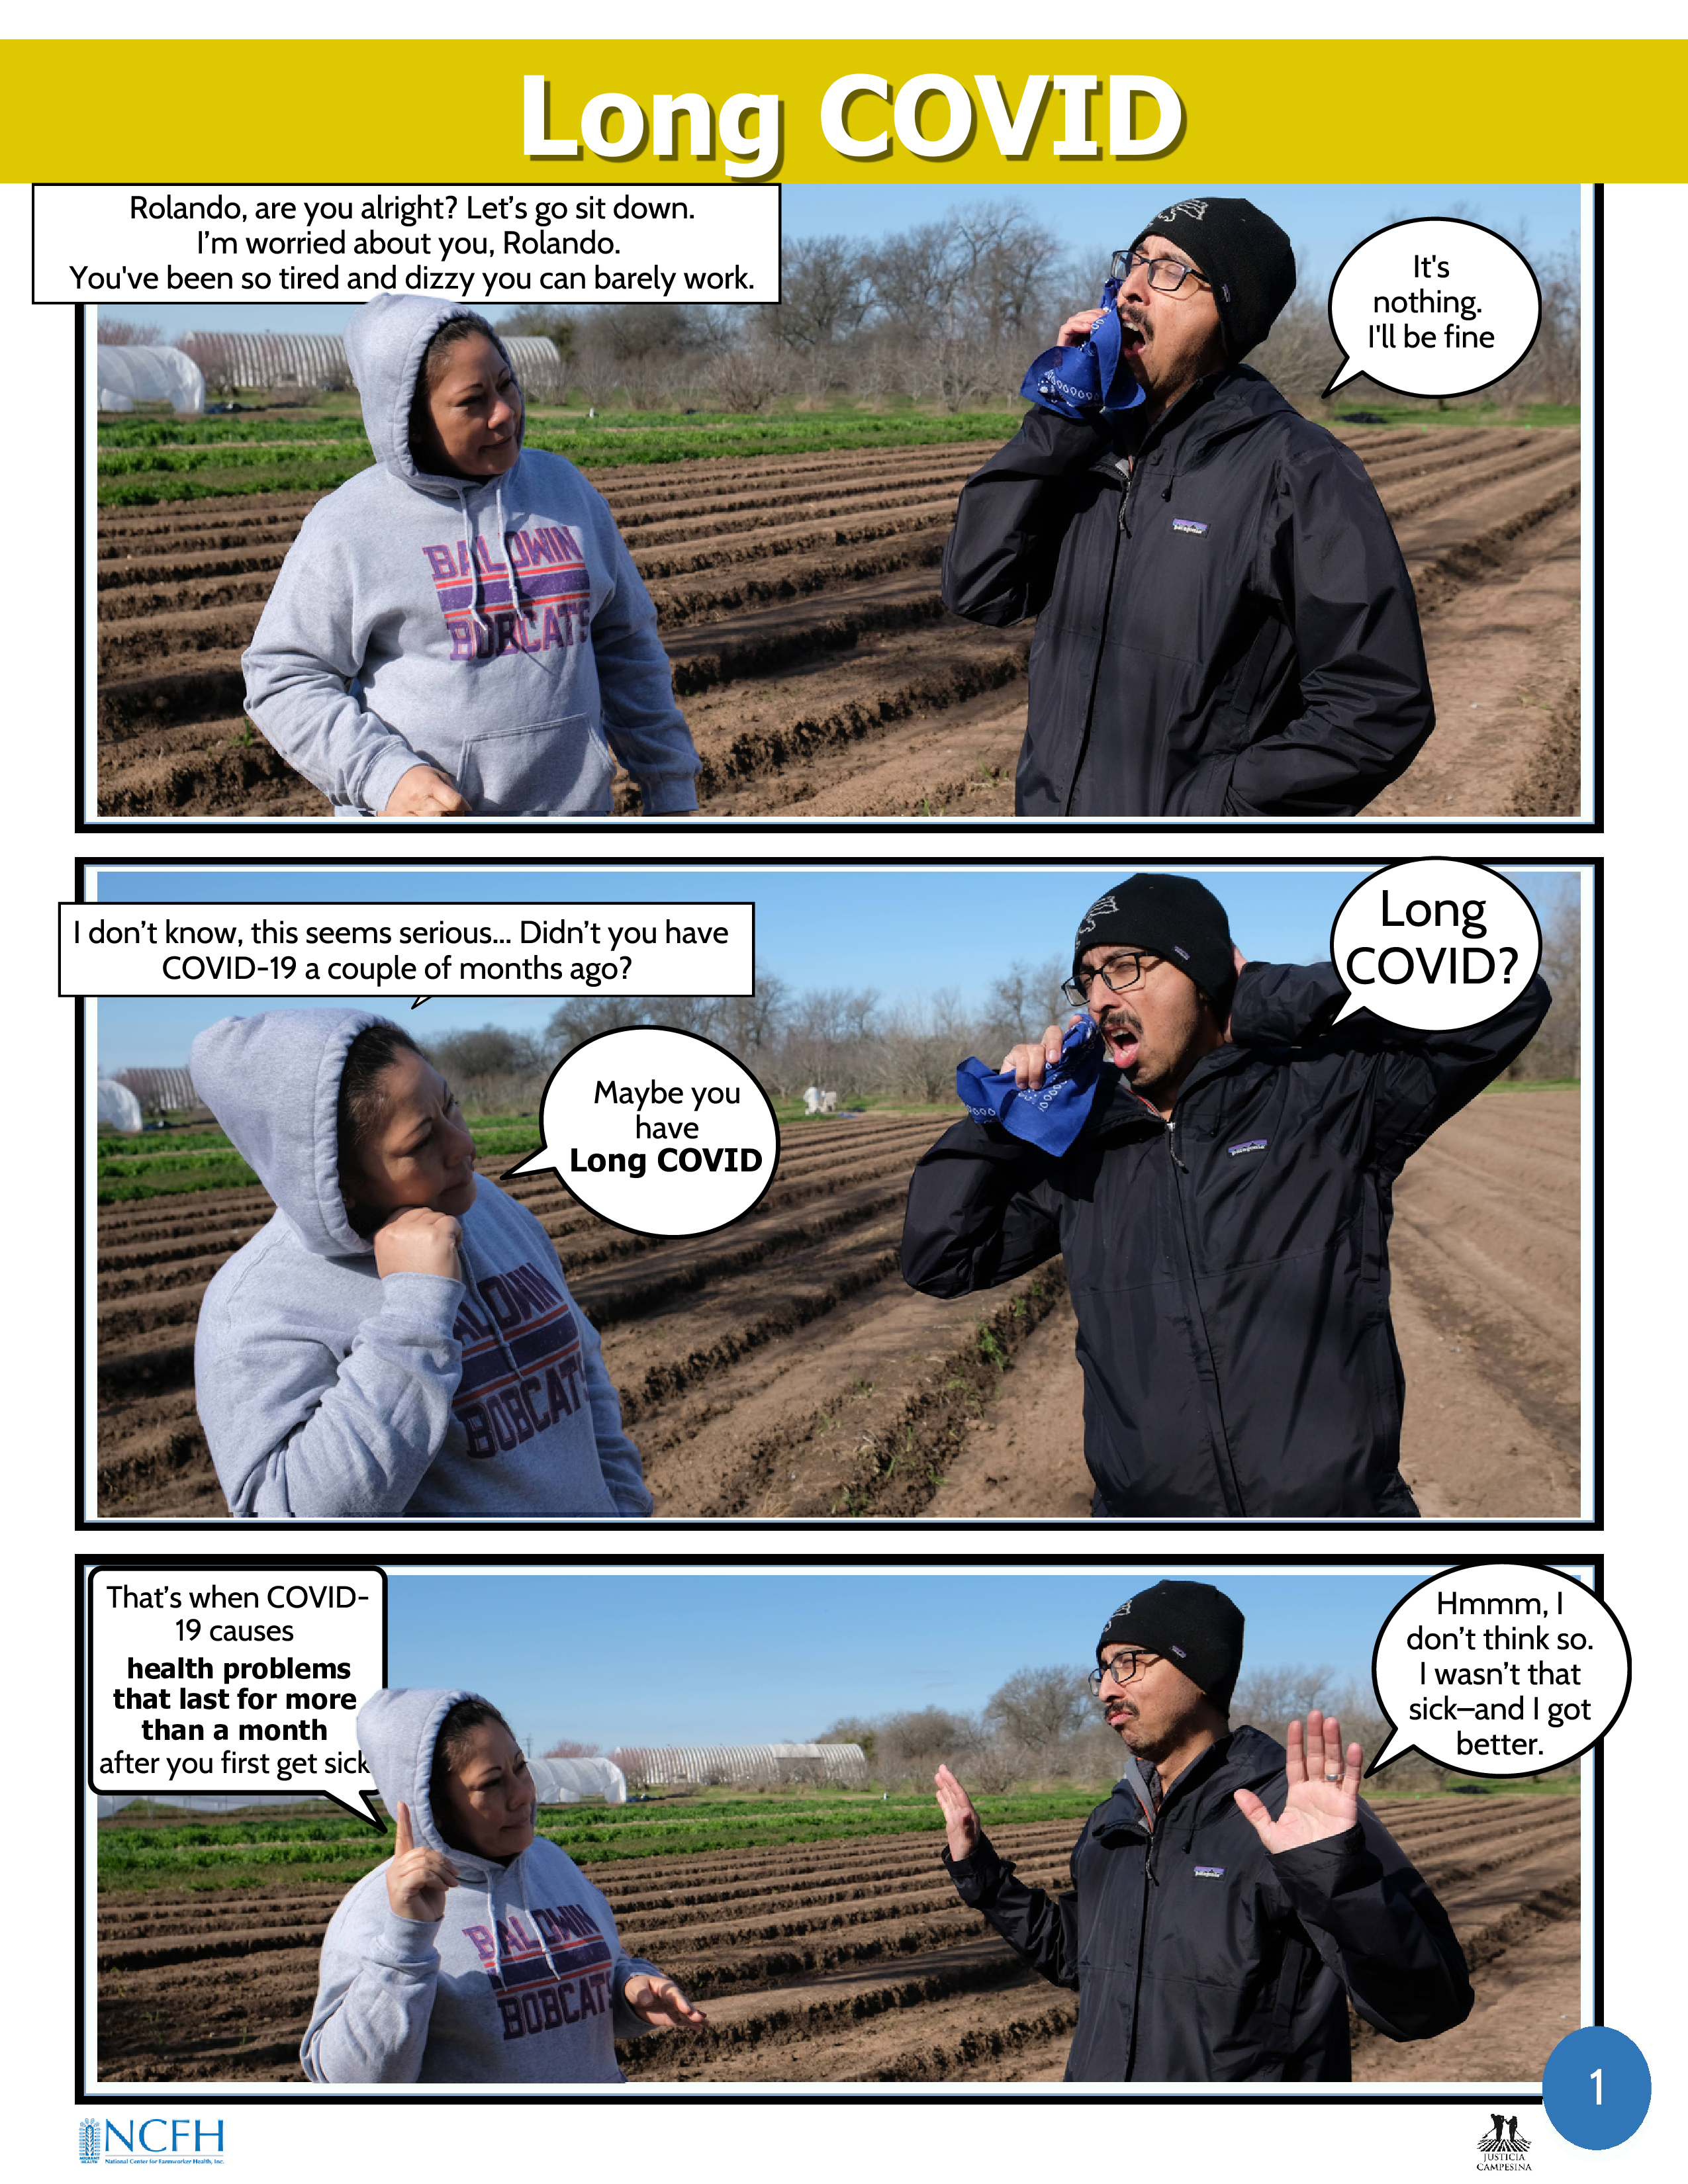 Two farmworkers talk to each other in a field, one of whom is showing signs of fatigue.